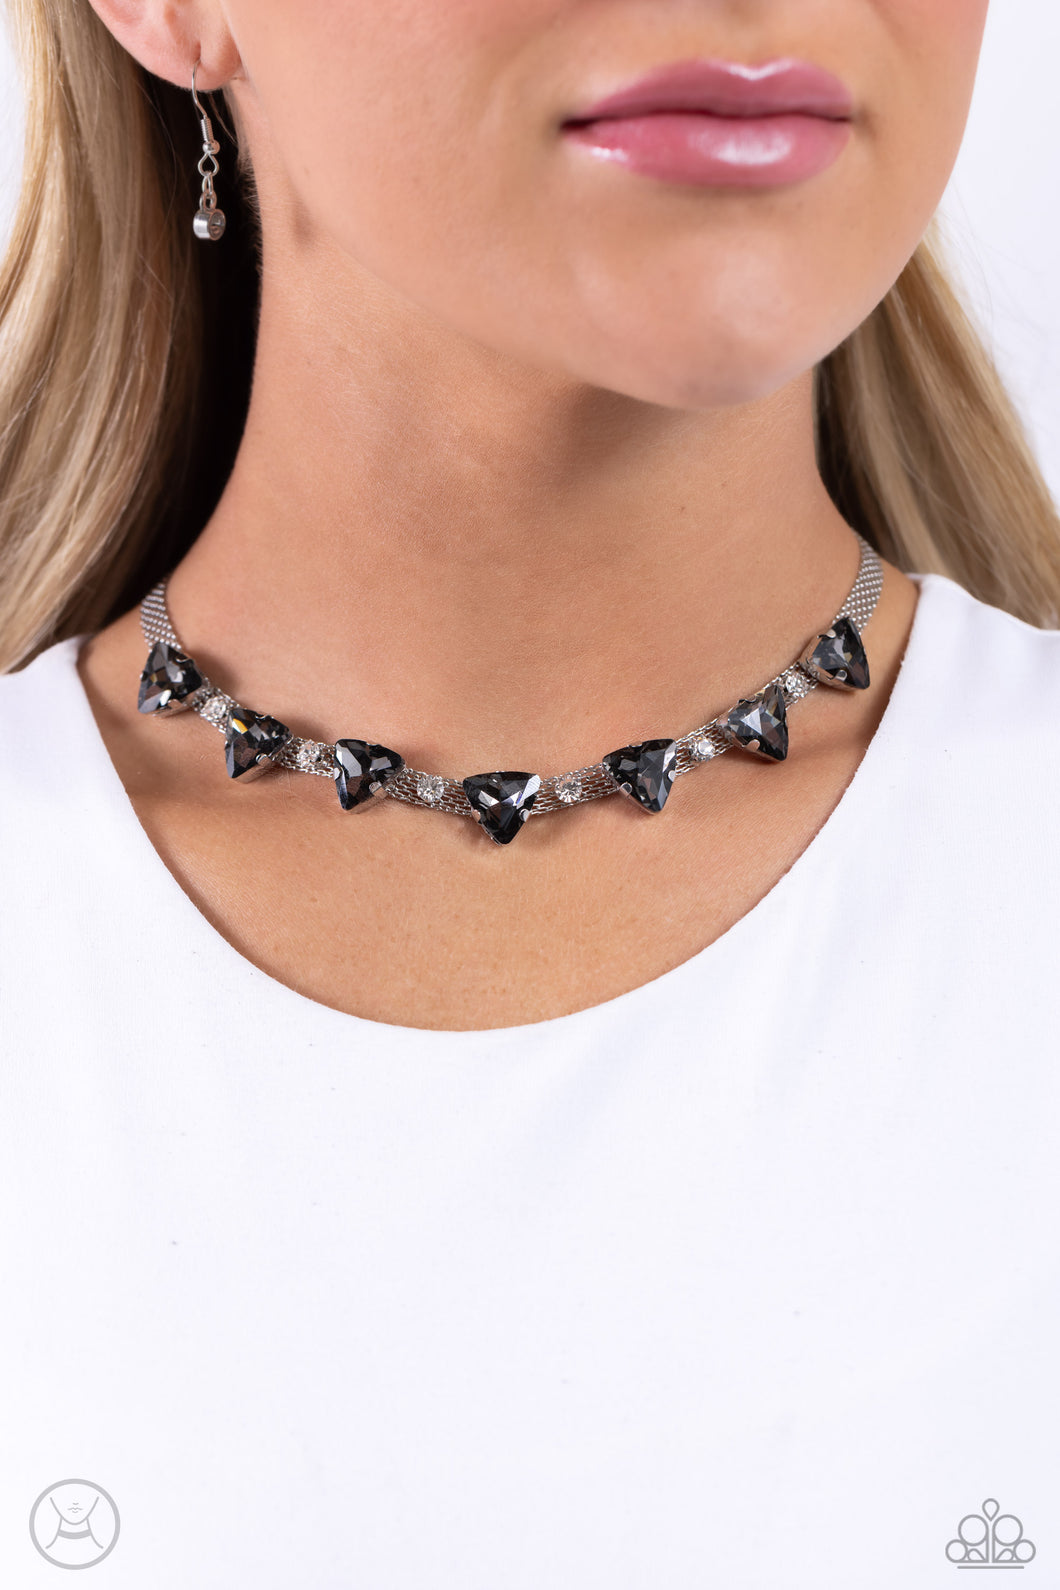 Paparazzi “Strands of Sass” Silver Necklace Earring Set